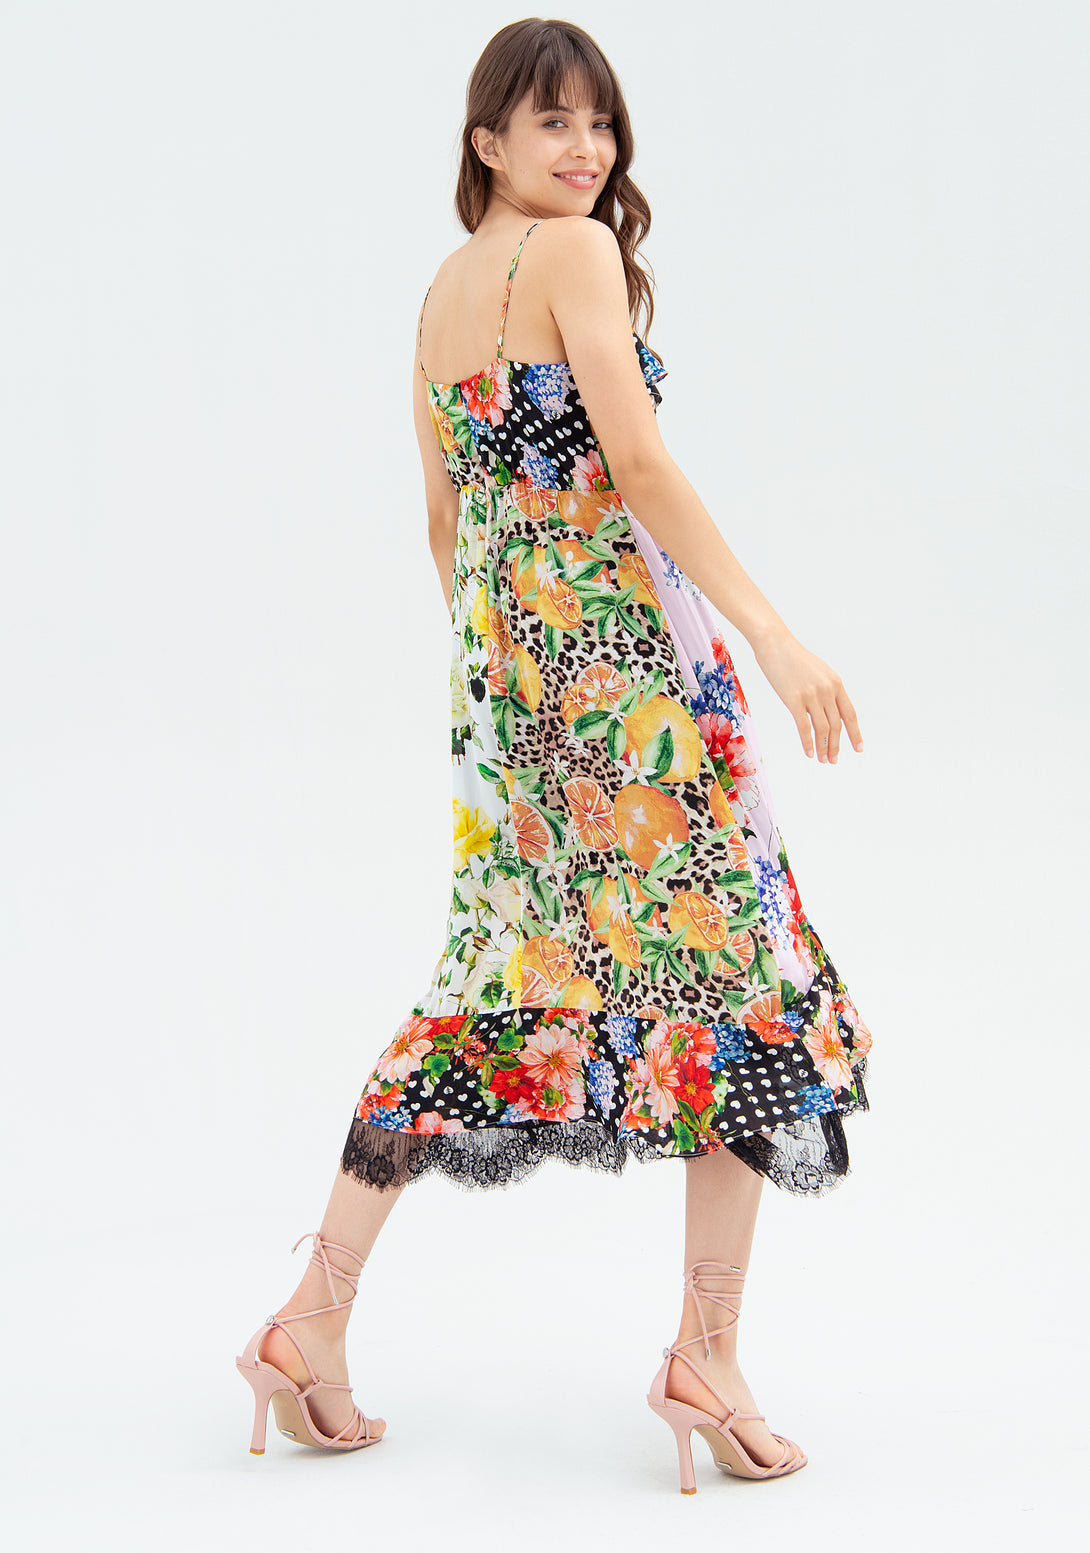 Dress with no sleeves, middle length, and multicolor pattern